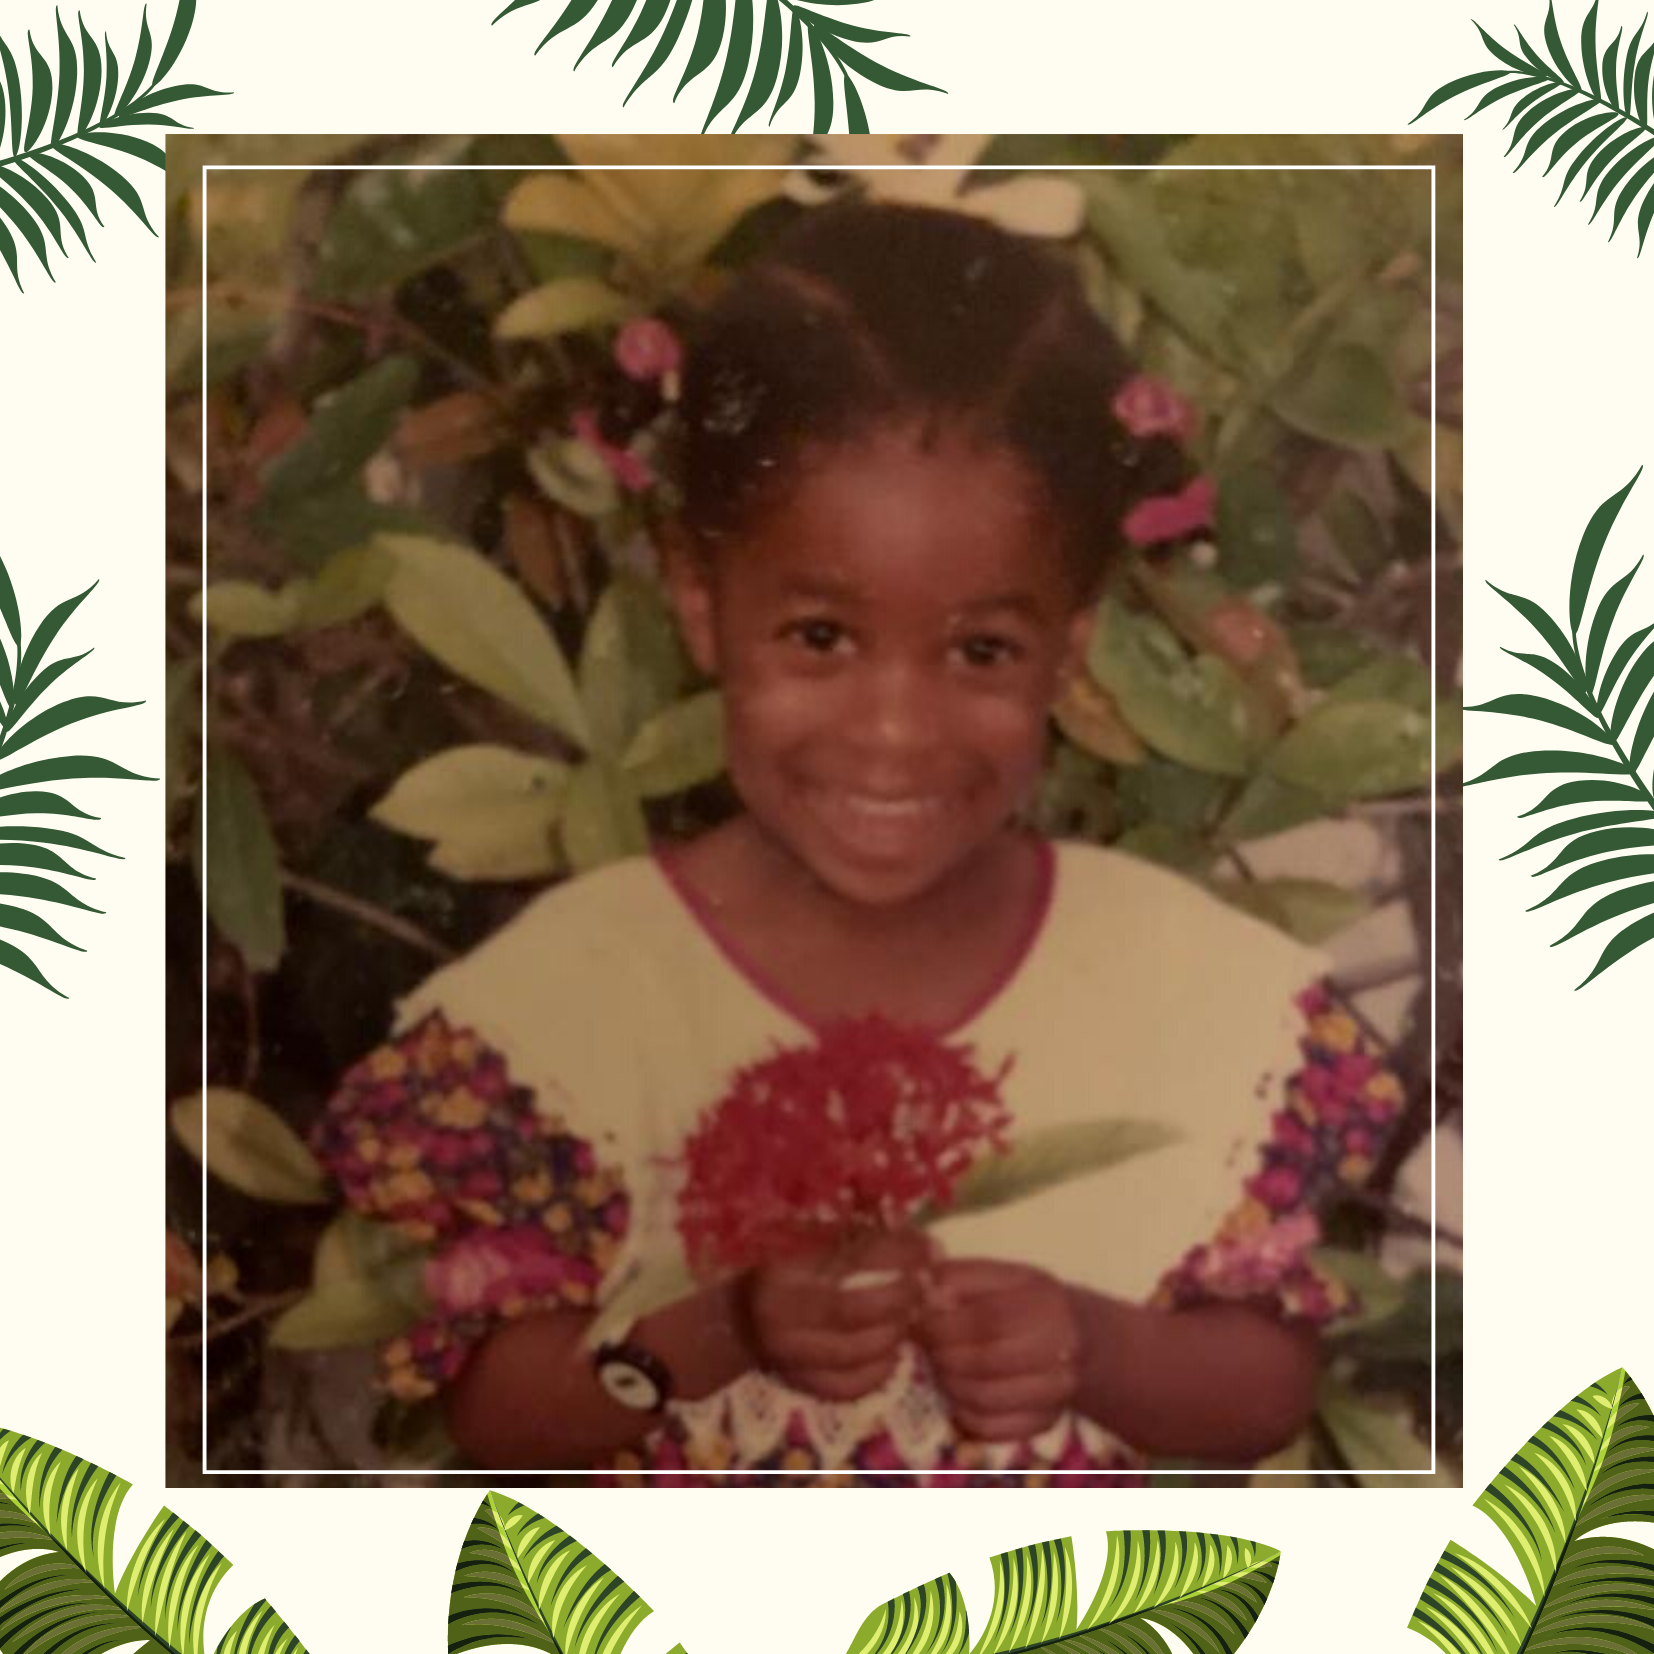 Growing Up Jamaican (Part Two)